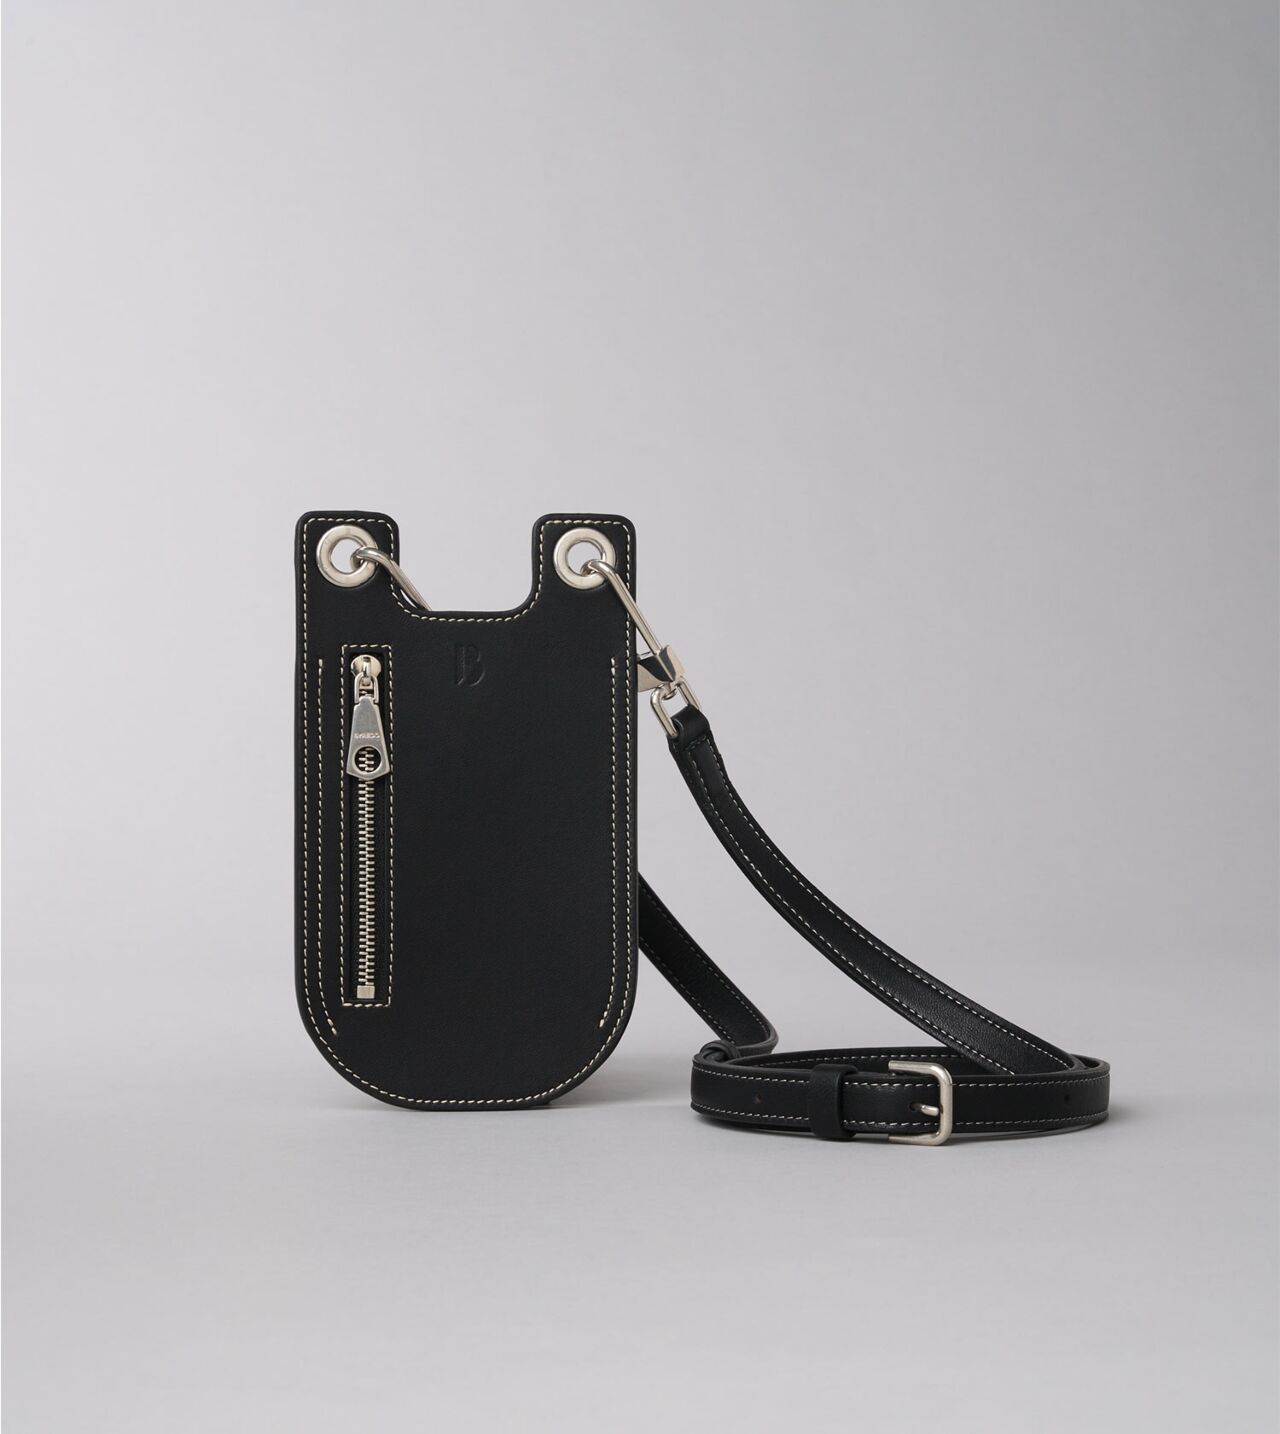 Phone Holder in Black Leather